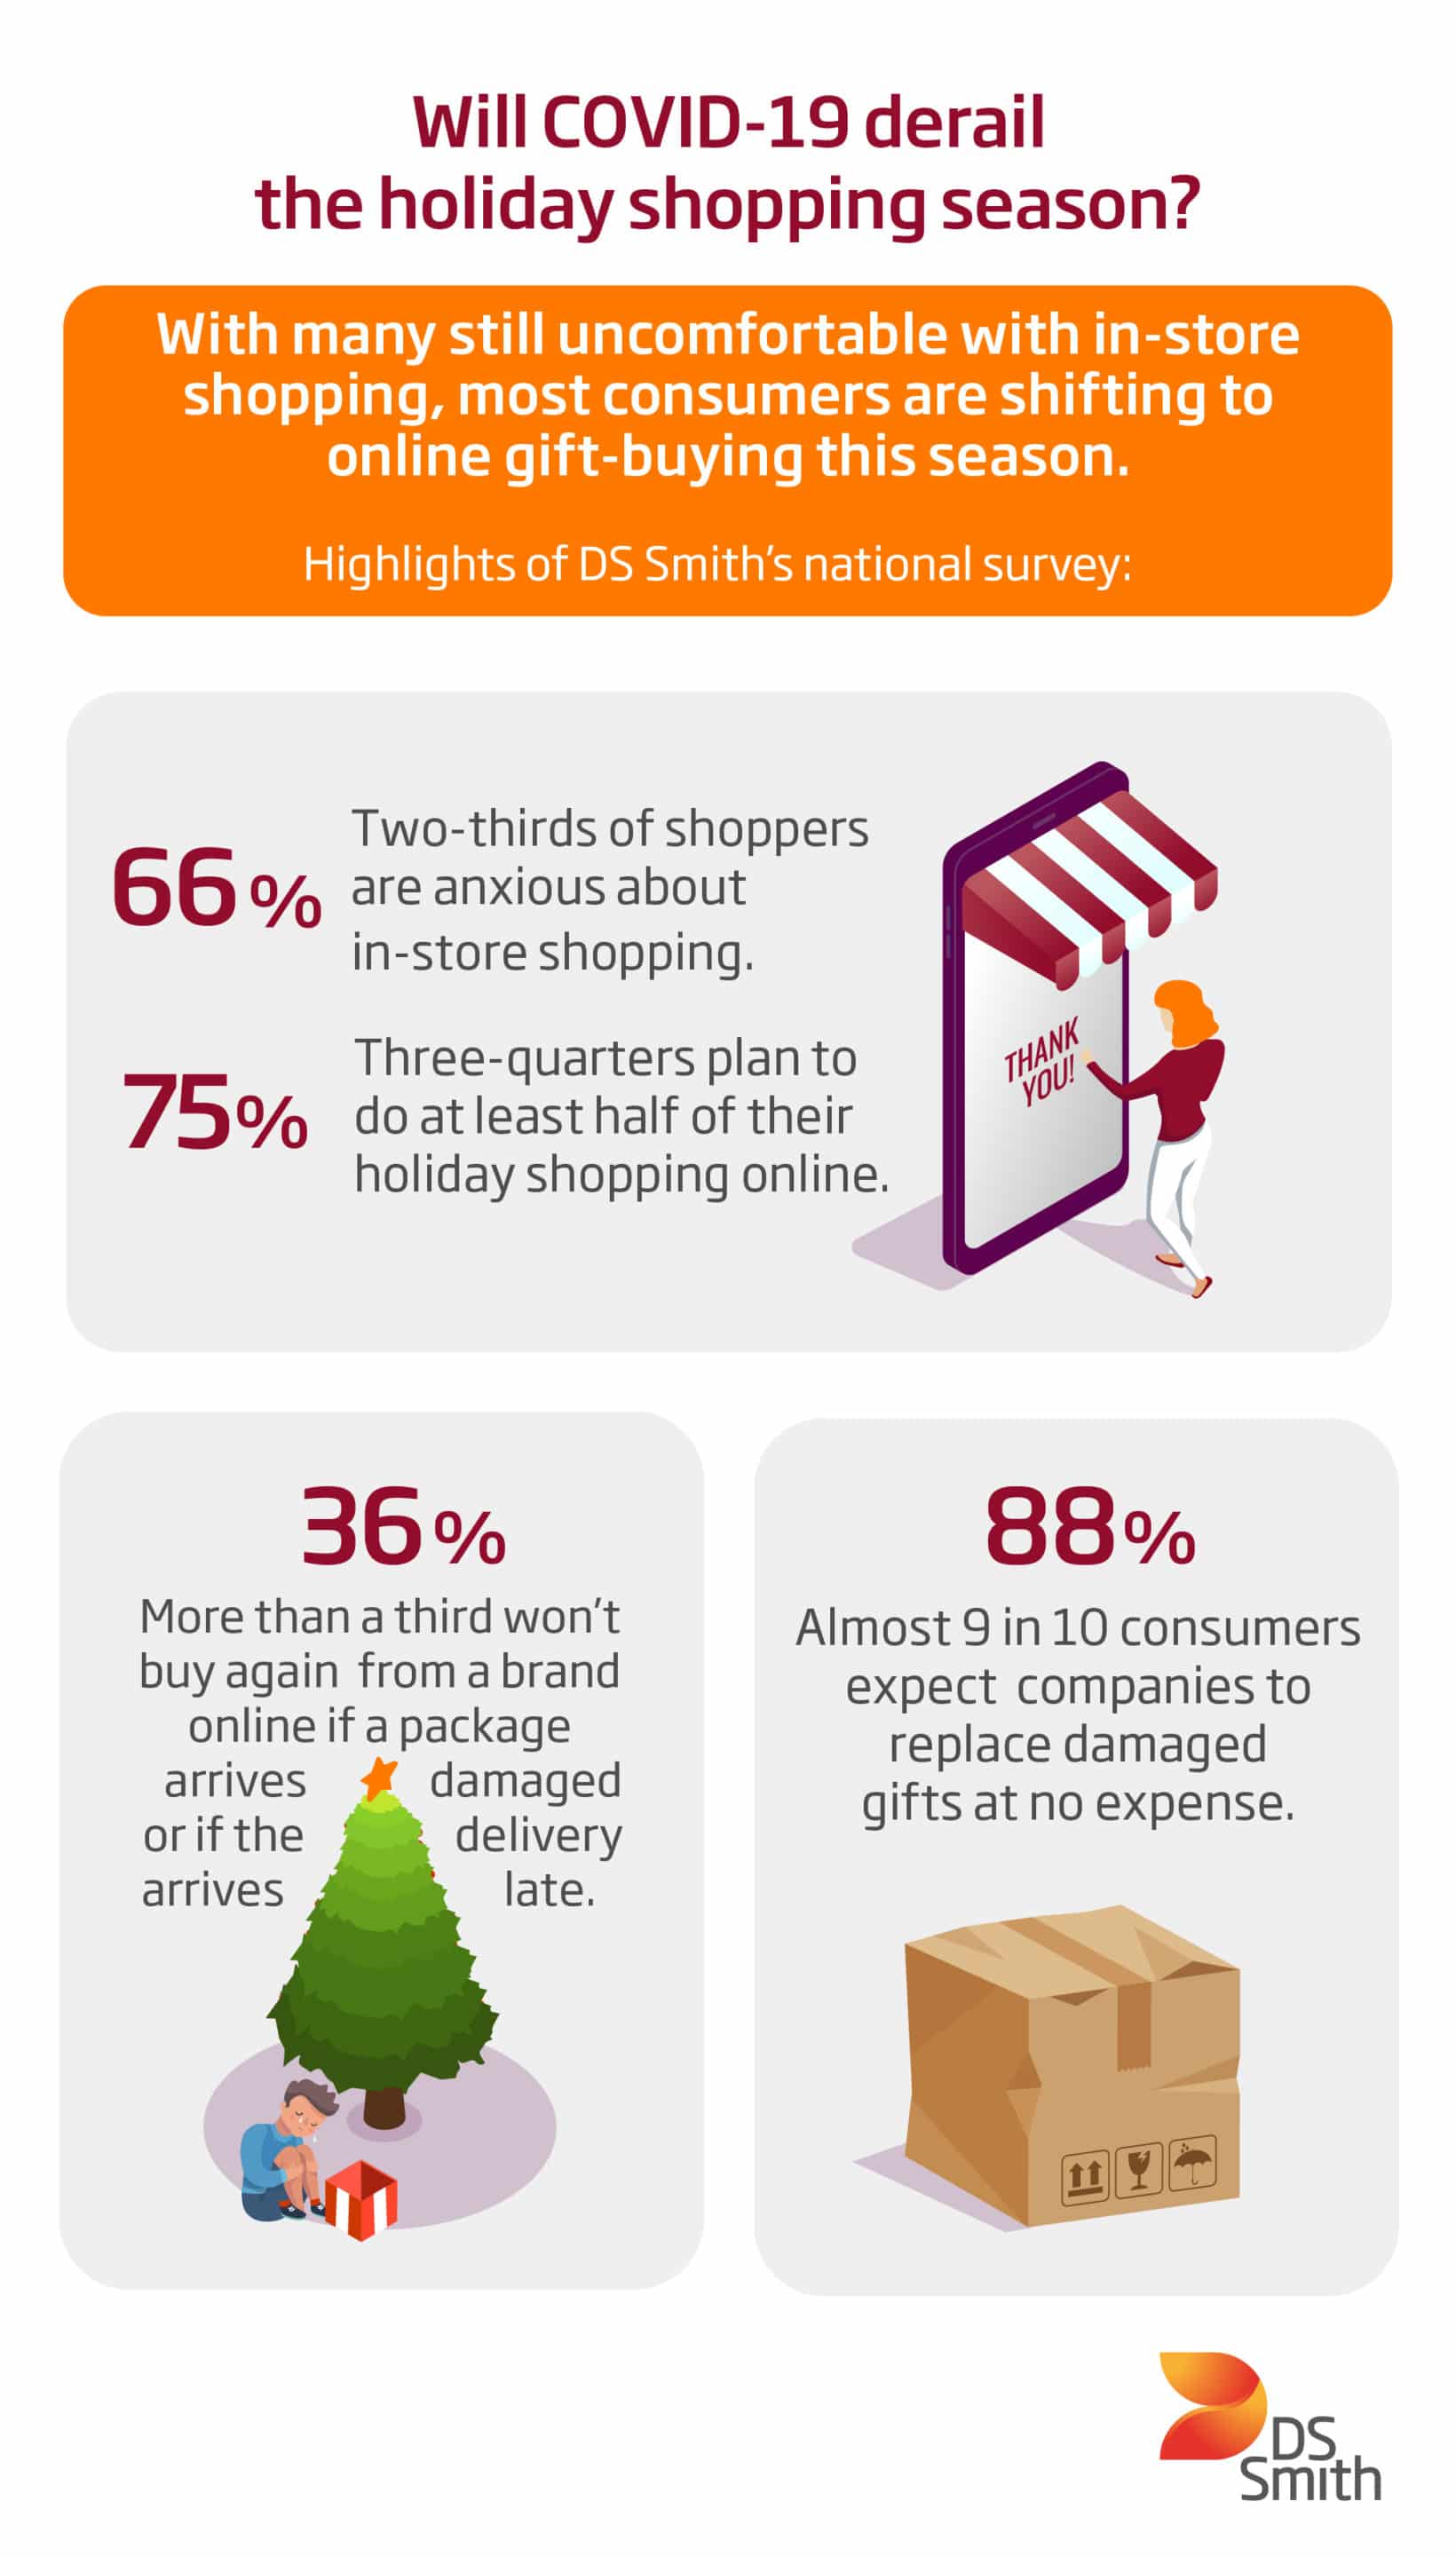 During 2020’s online holiday shopping boom, consumers will expect sustainable packaging